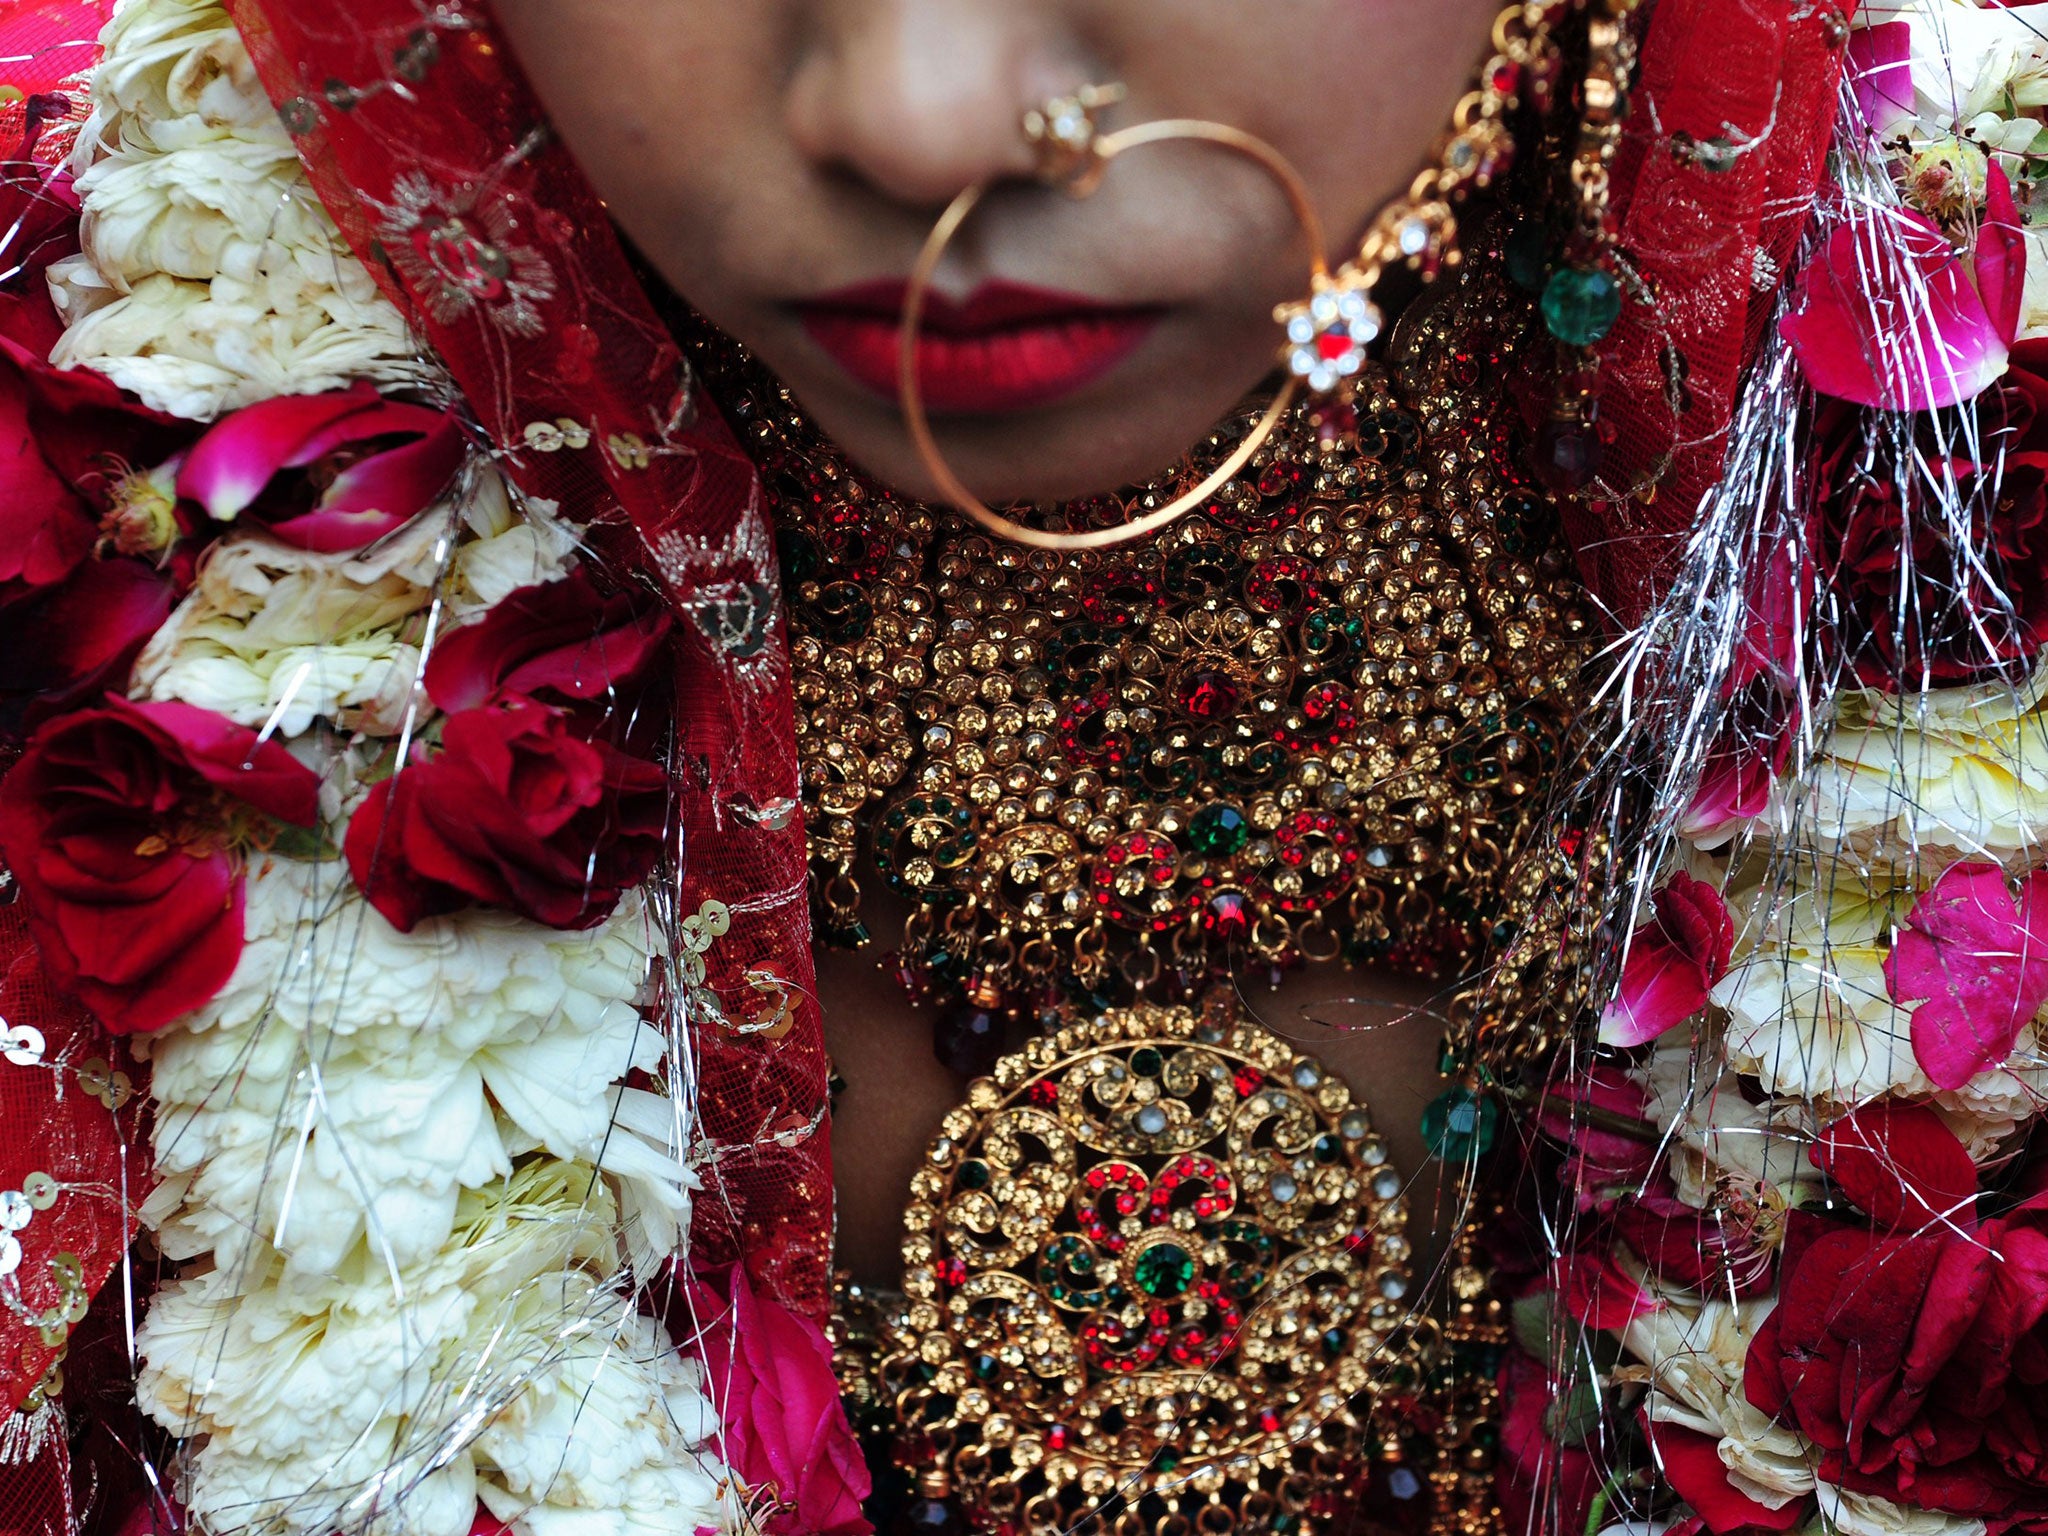 Many Muslim schoolgirls will be forced into a non-consensual wedding